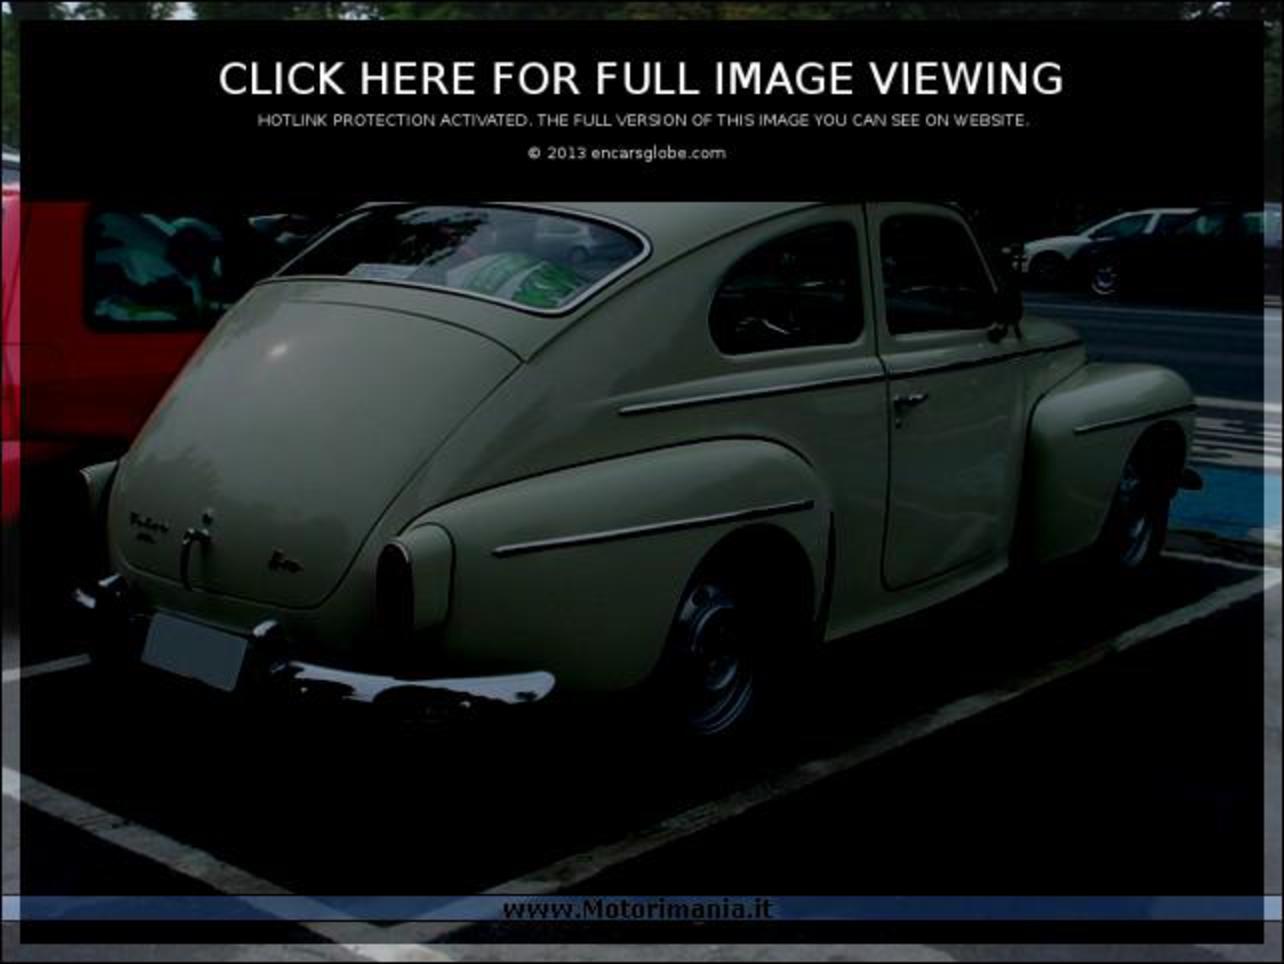 Volvo PV 544 G: Photo gallery, complete information about model ...